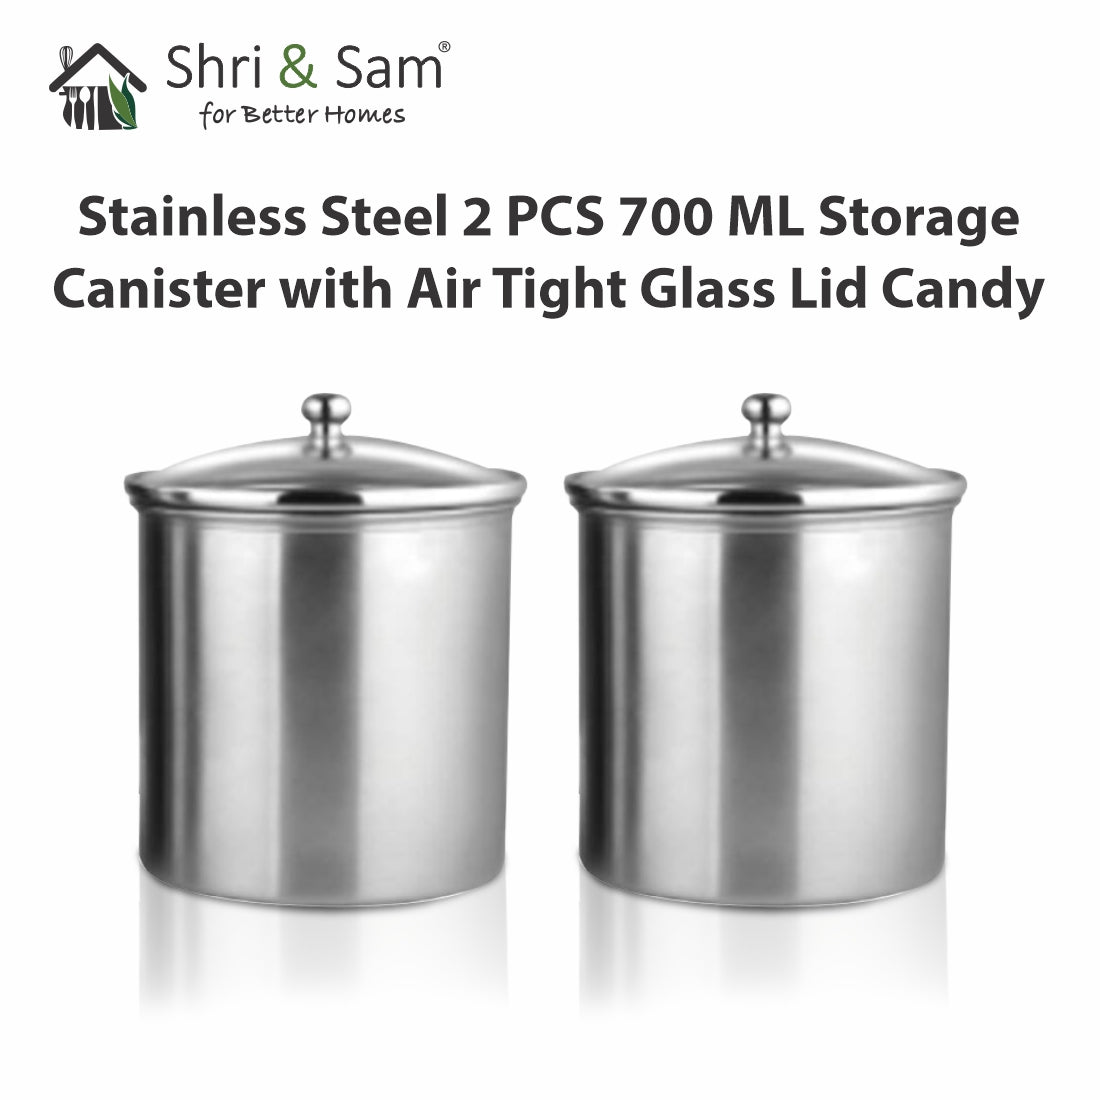 Stainless Steel 2 PCS 700 ML Storage Canister with Air Tight Glass Lid Candy